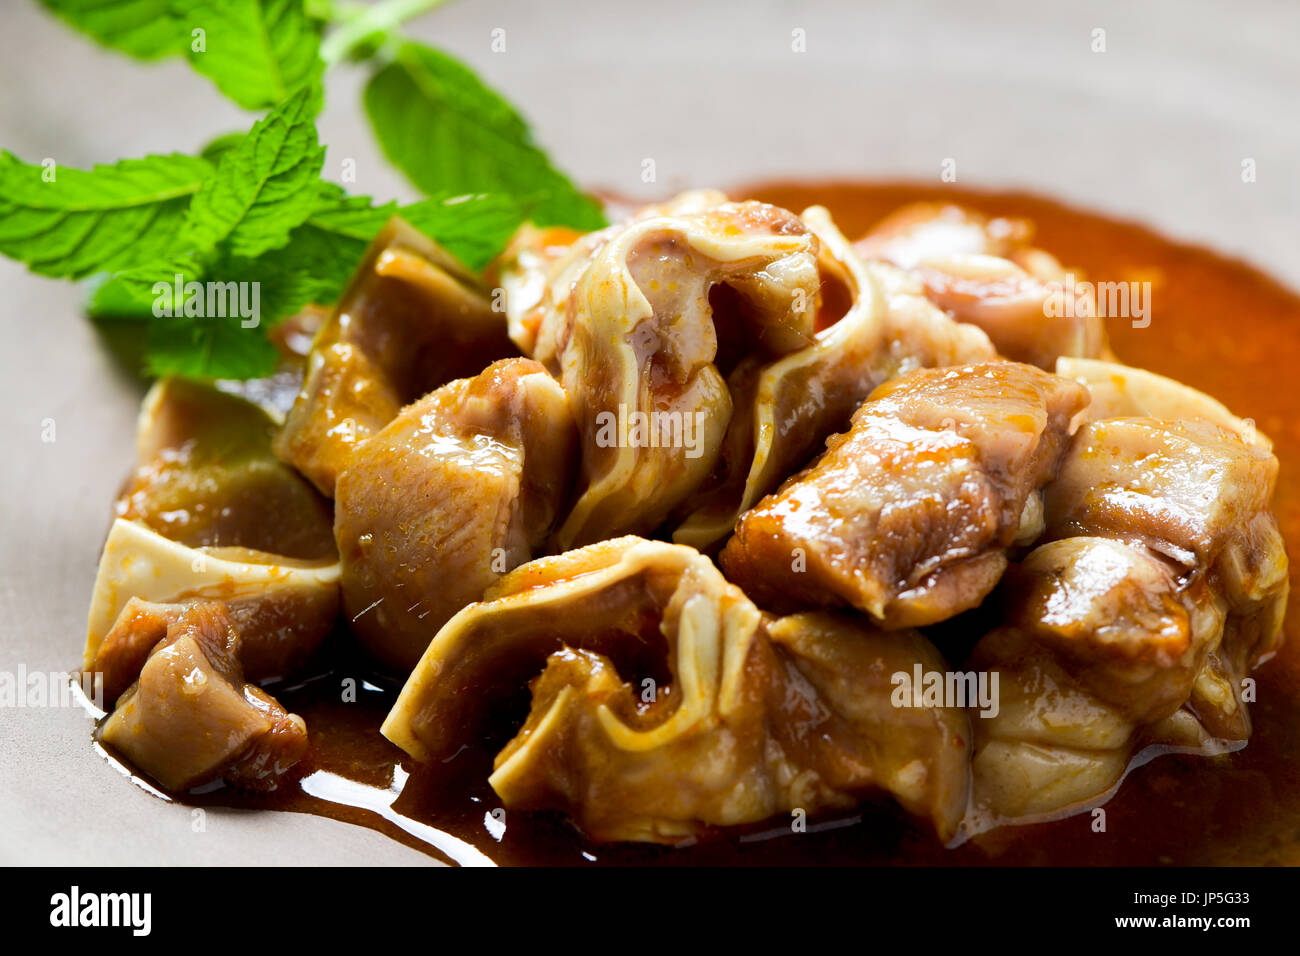 spanish oreja de cerdo, a typical stew of pigs ear, served on a slate tray Stock Photo